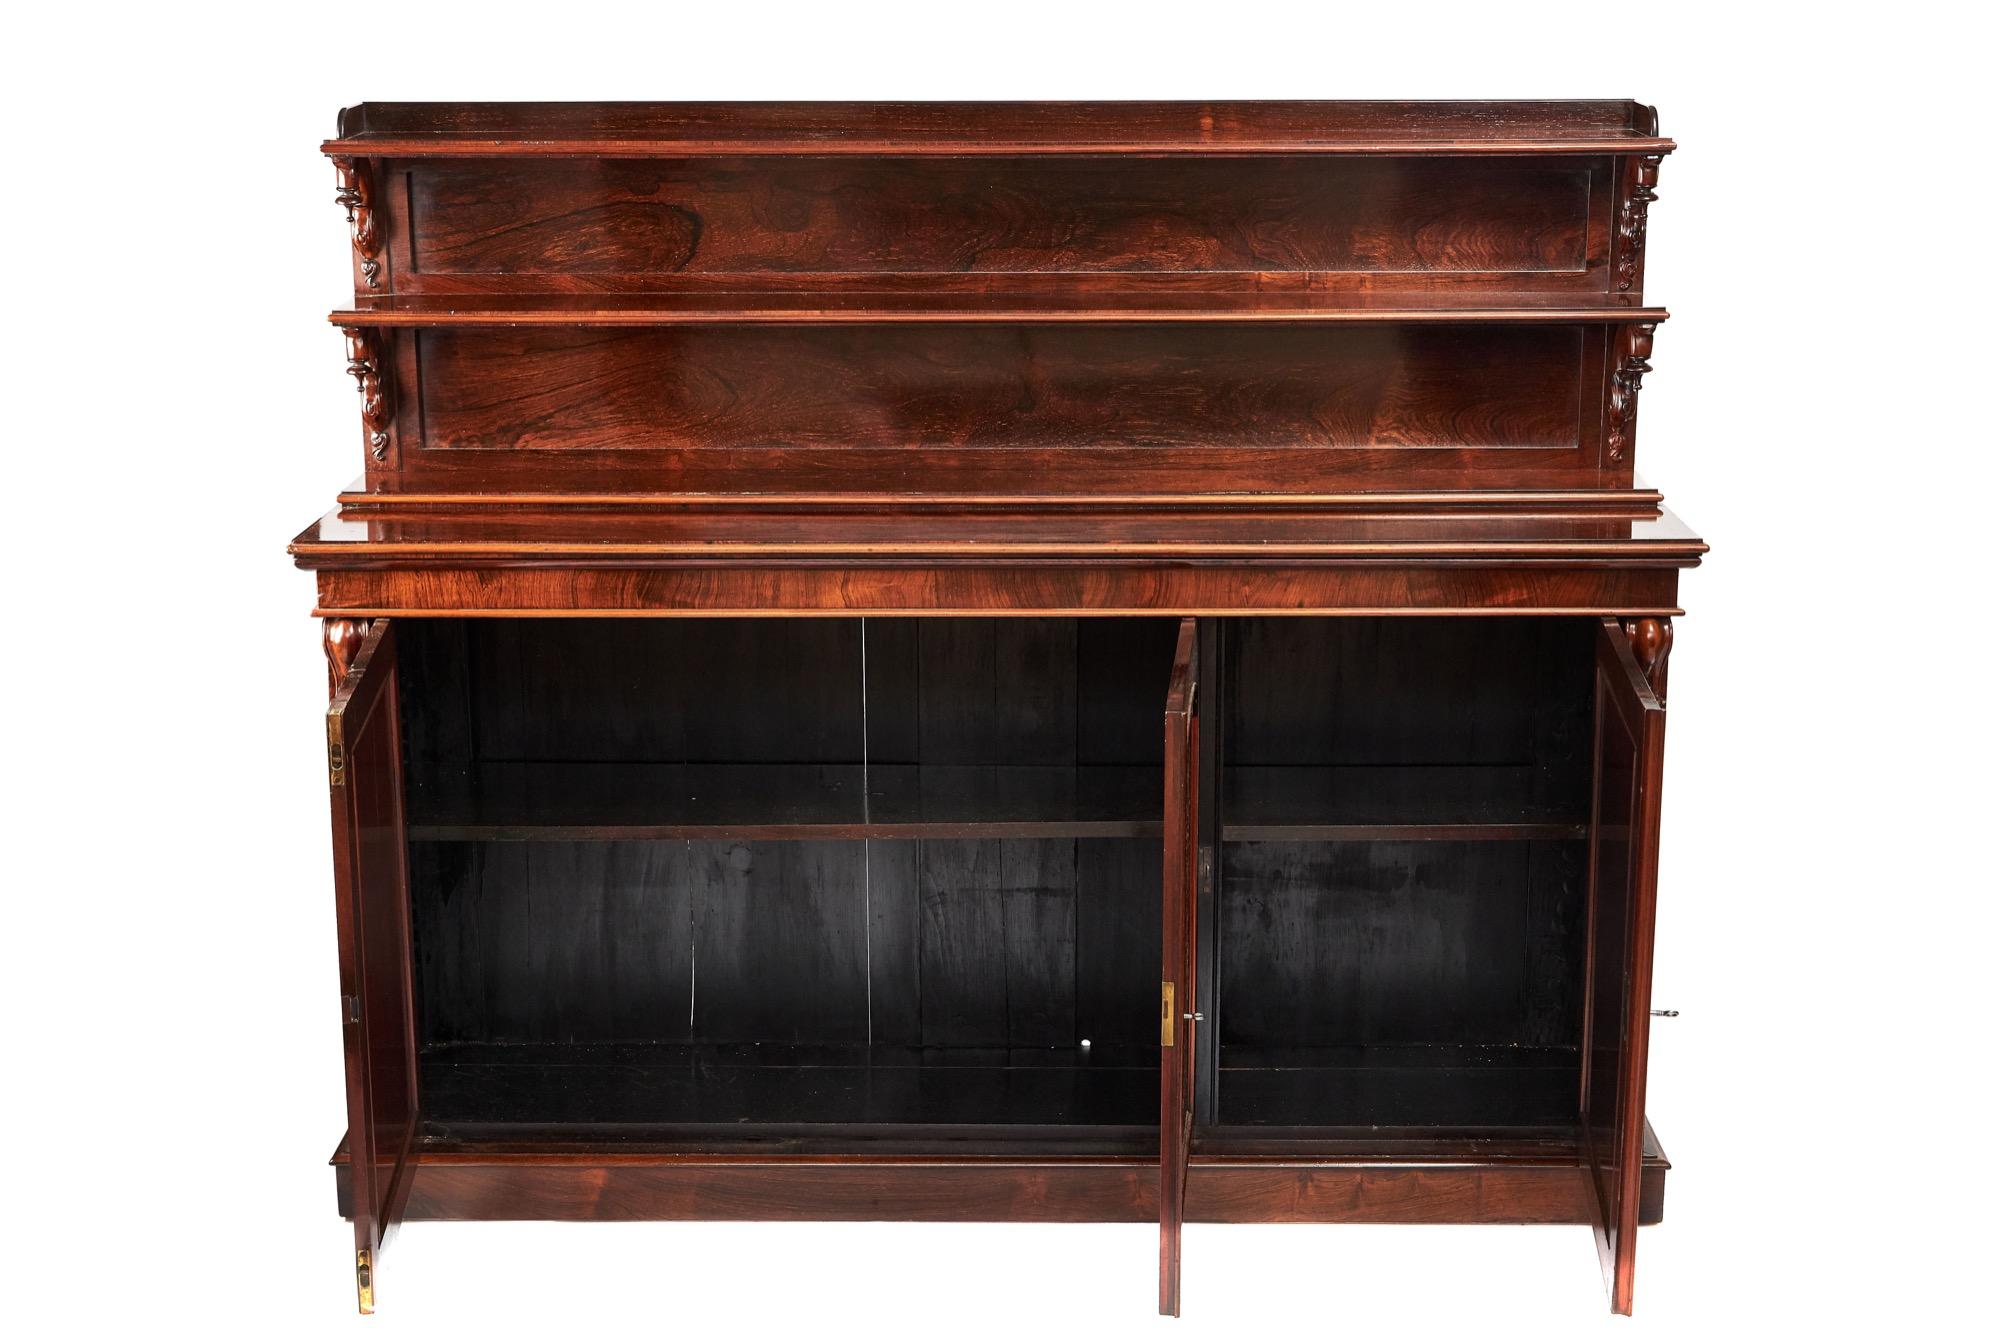 Antique early 19th century Regency Goncalo Alves three-door side cabinet. This is the most magnificent example having a three-tier shelved back with beautifully carved supports, three arched doors to the base flanked by glorious carved corbels